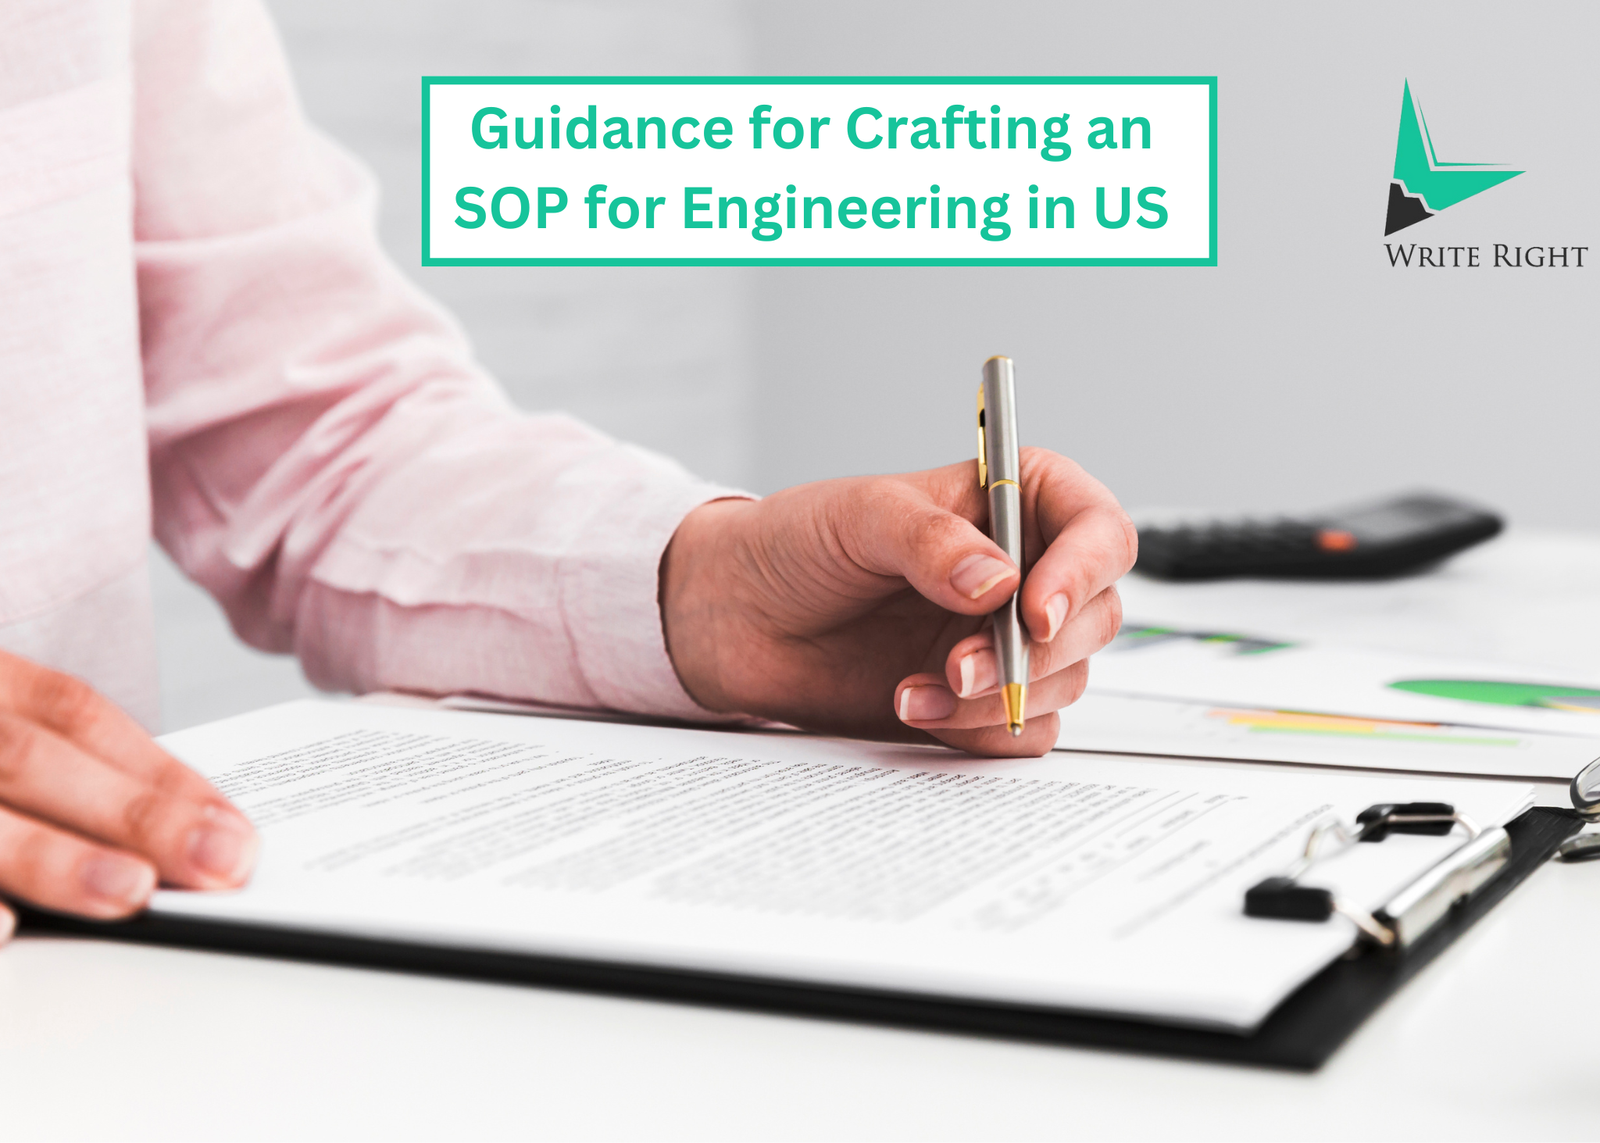 Top Tips for Crafting an SOP for Engineering in the US